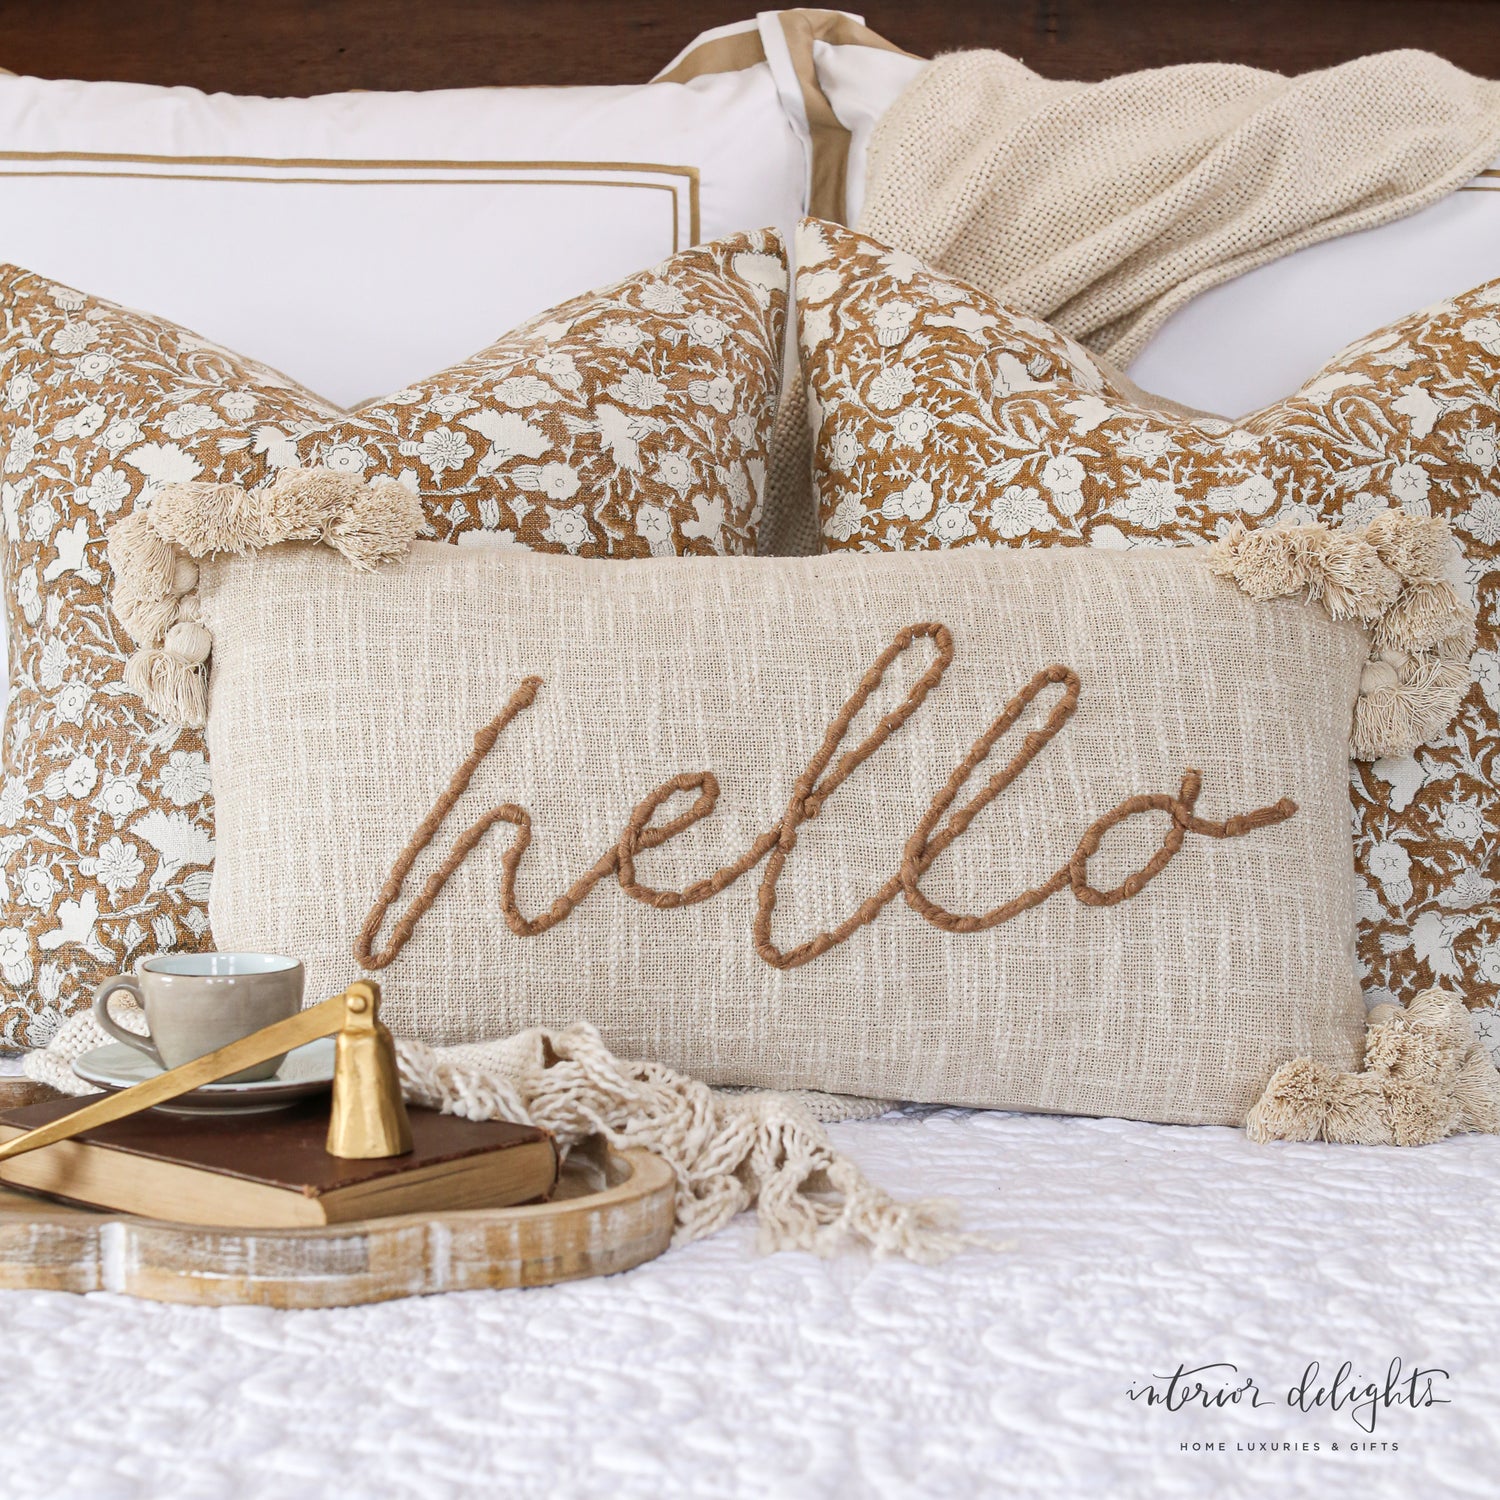 Embroidery Tassel Pillows- Hello or Home